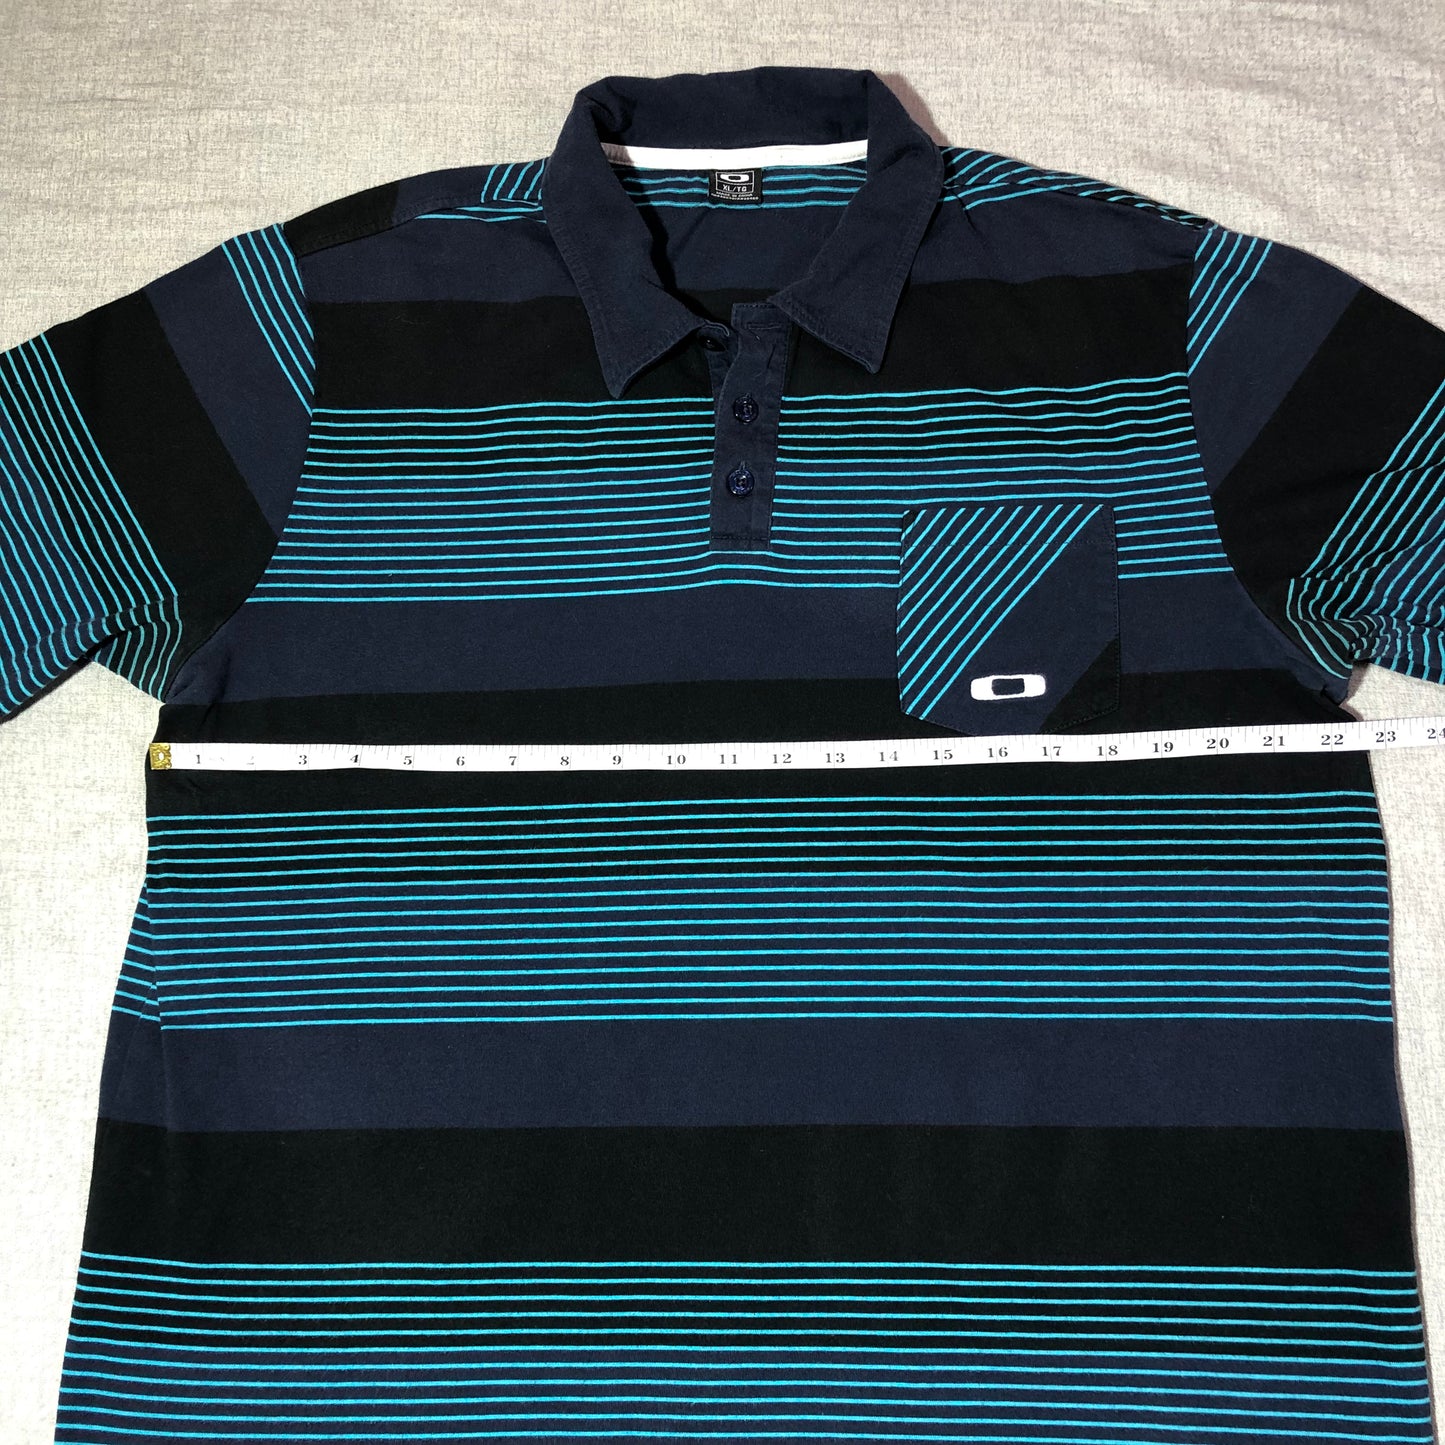 Oakley Polo Shirt Mens XL Striped Short Sleeve Knit Cotton Embroidered Logo Golf